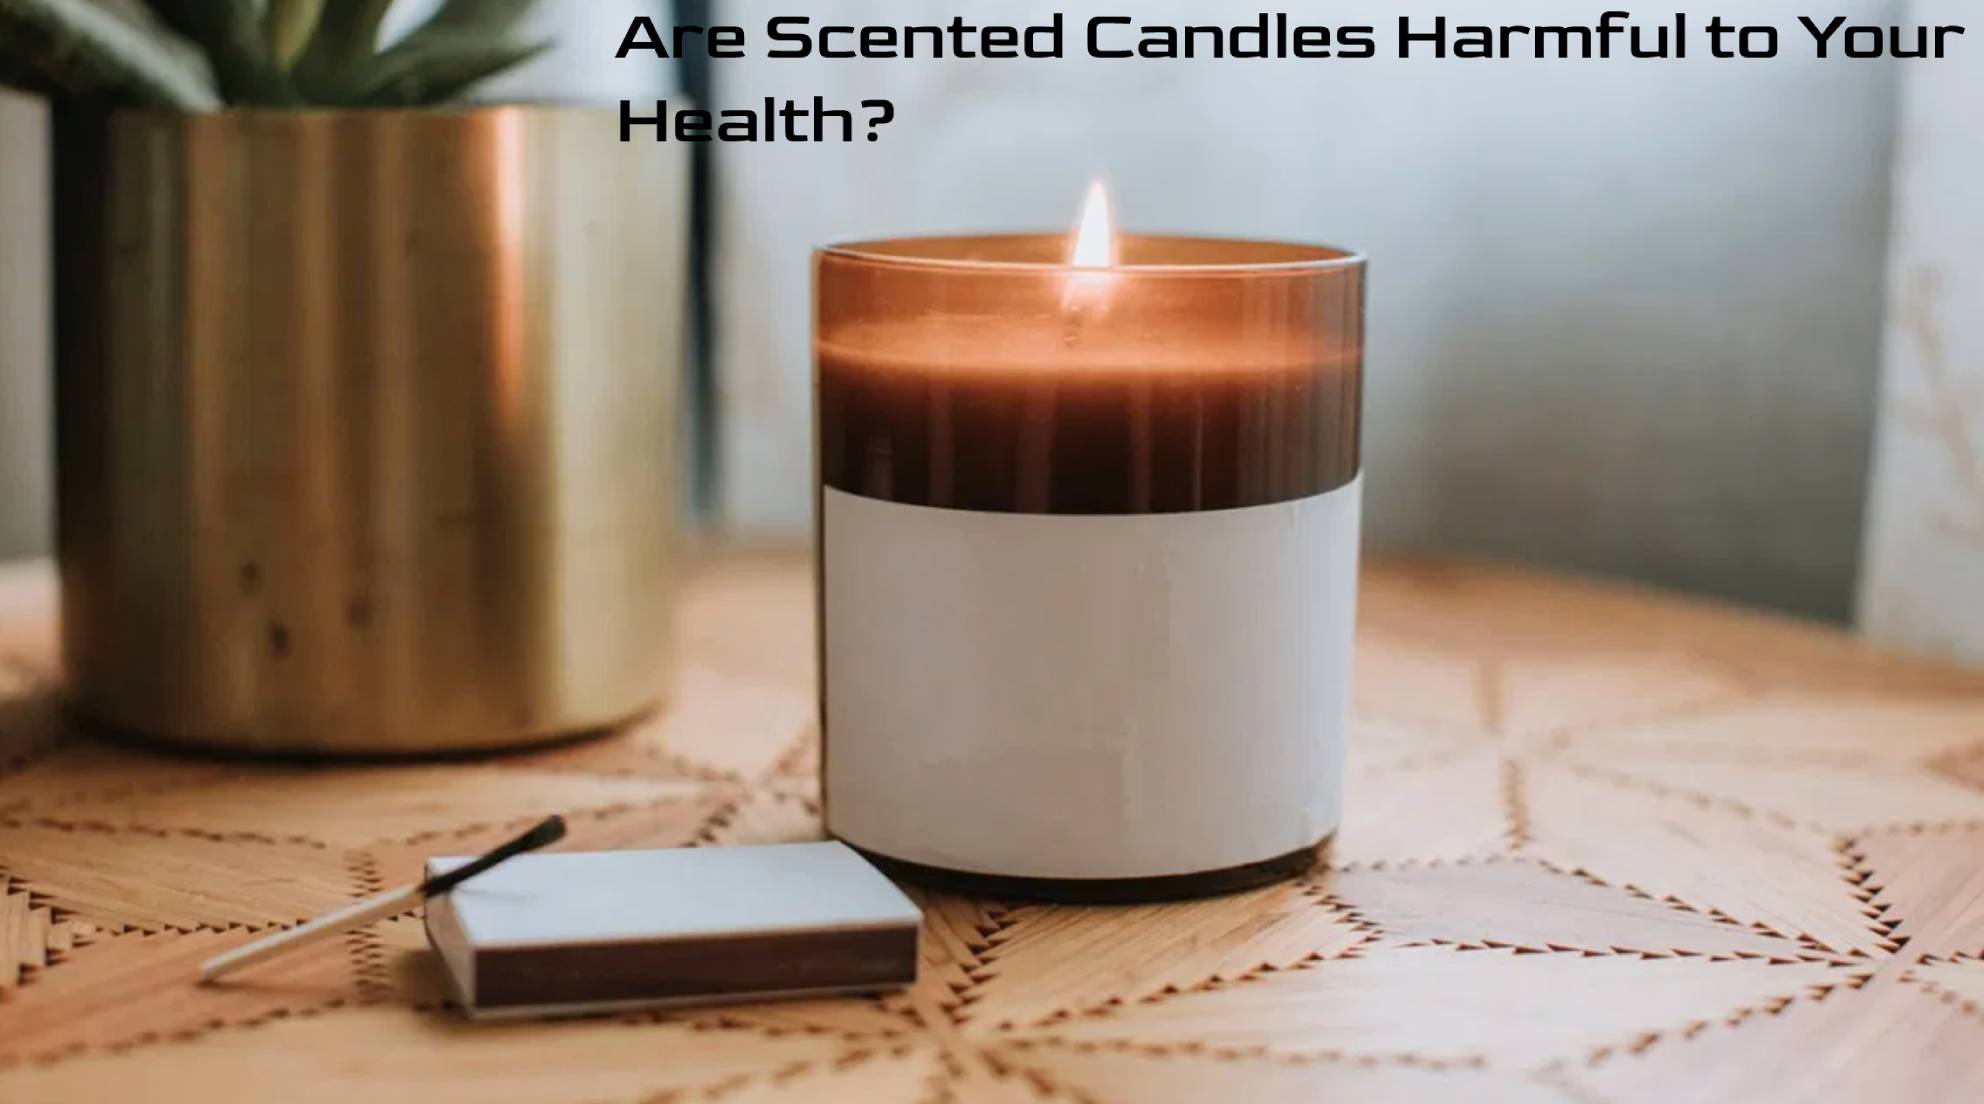 Are Scented Candles Harmful to Your Health?